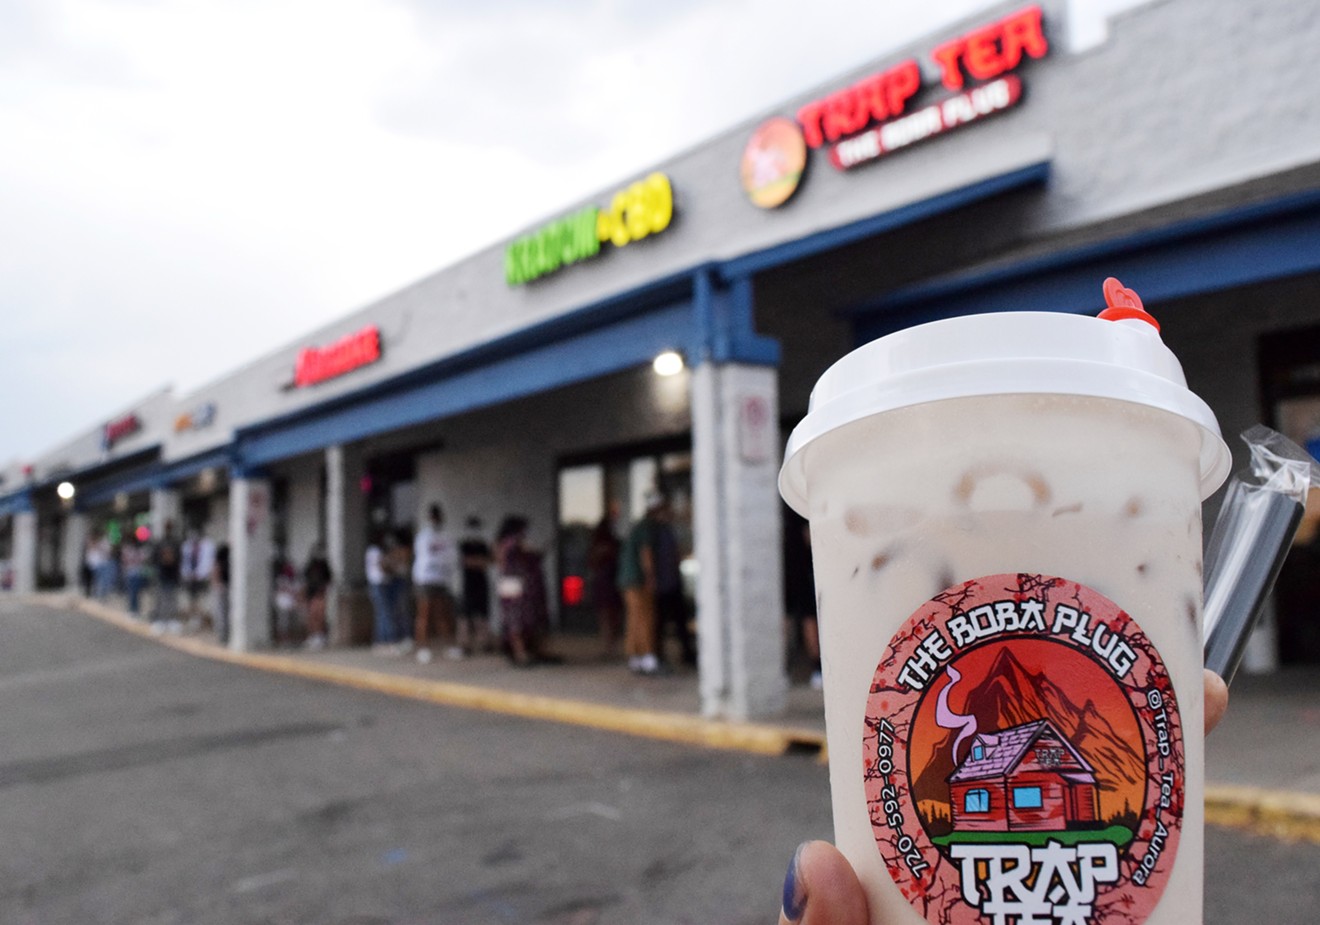 Customers wait in line at Trap Tea.